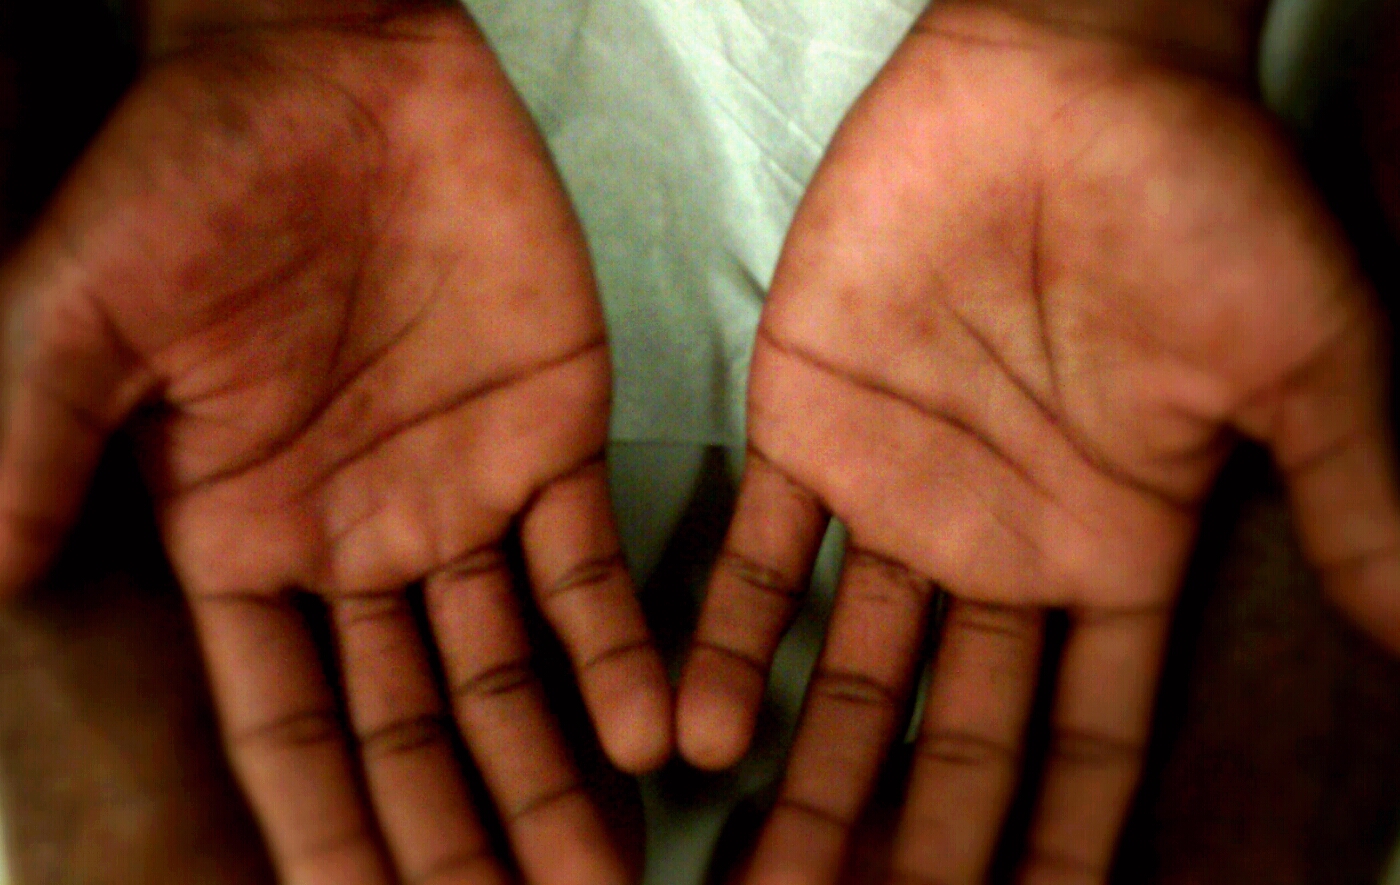 Case A 16yearold male complains of a rash on both hands